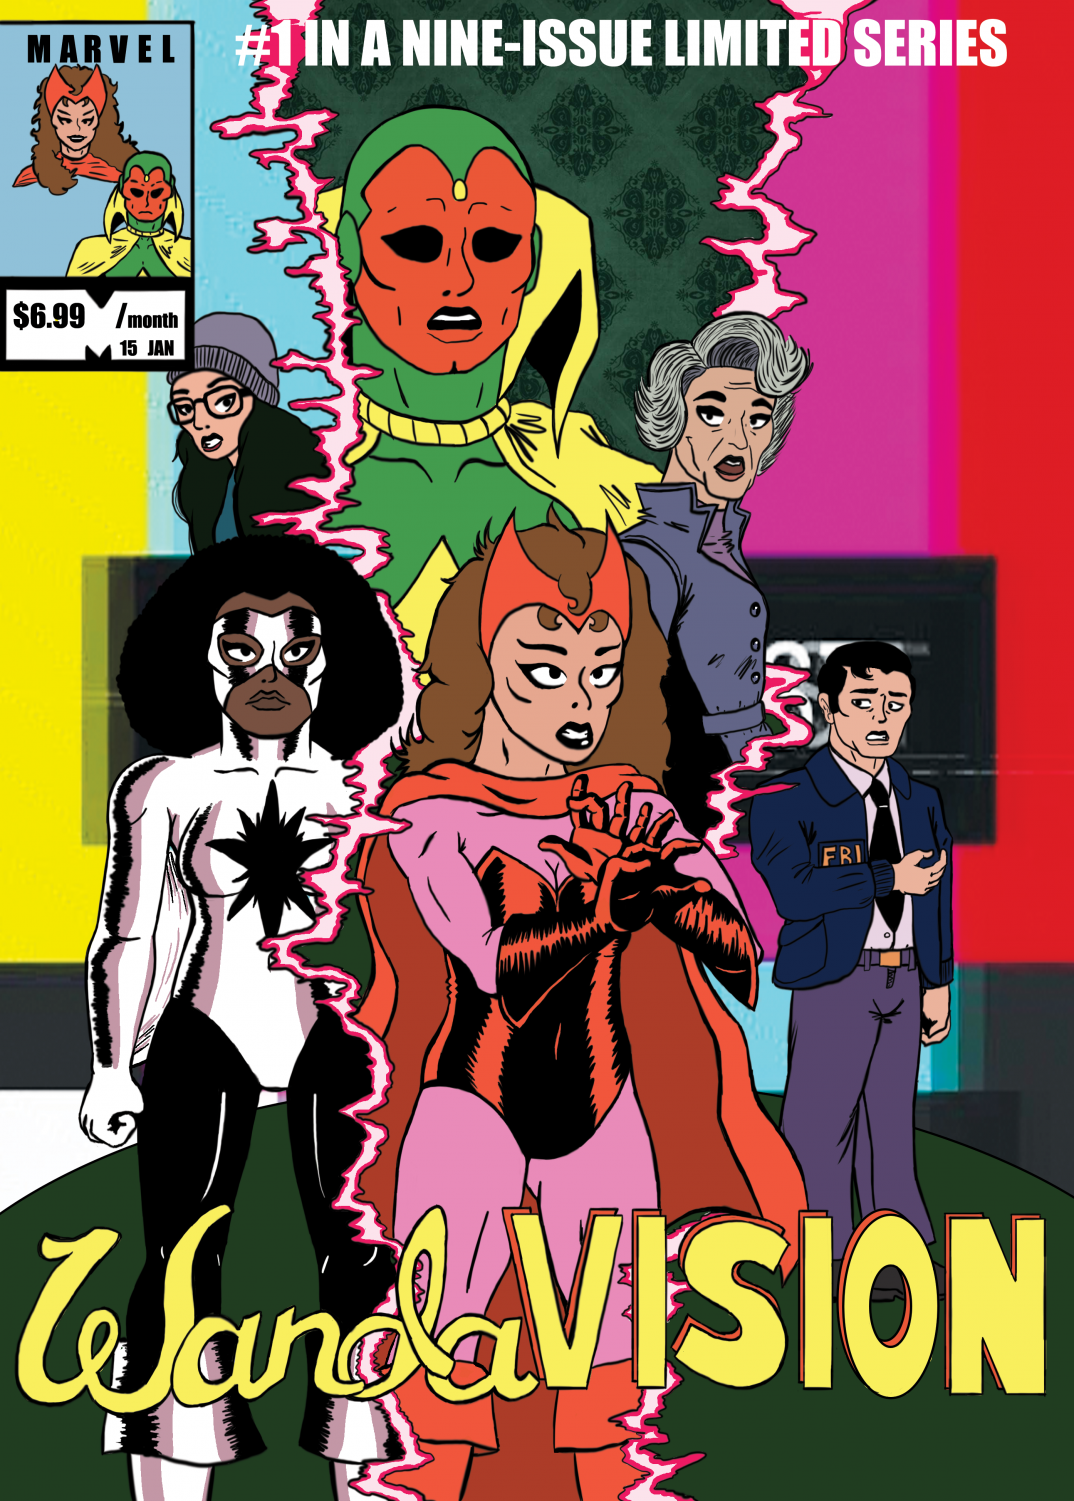 WandaVision%2C+the+first+series+from+Marvel+Studios+streaming+on+Disney%2B%2C+features+a+unique+blend+of+classic+television+tropes+and+the+MCU.+Art+by+Carter+Ross.+